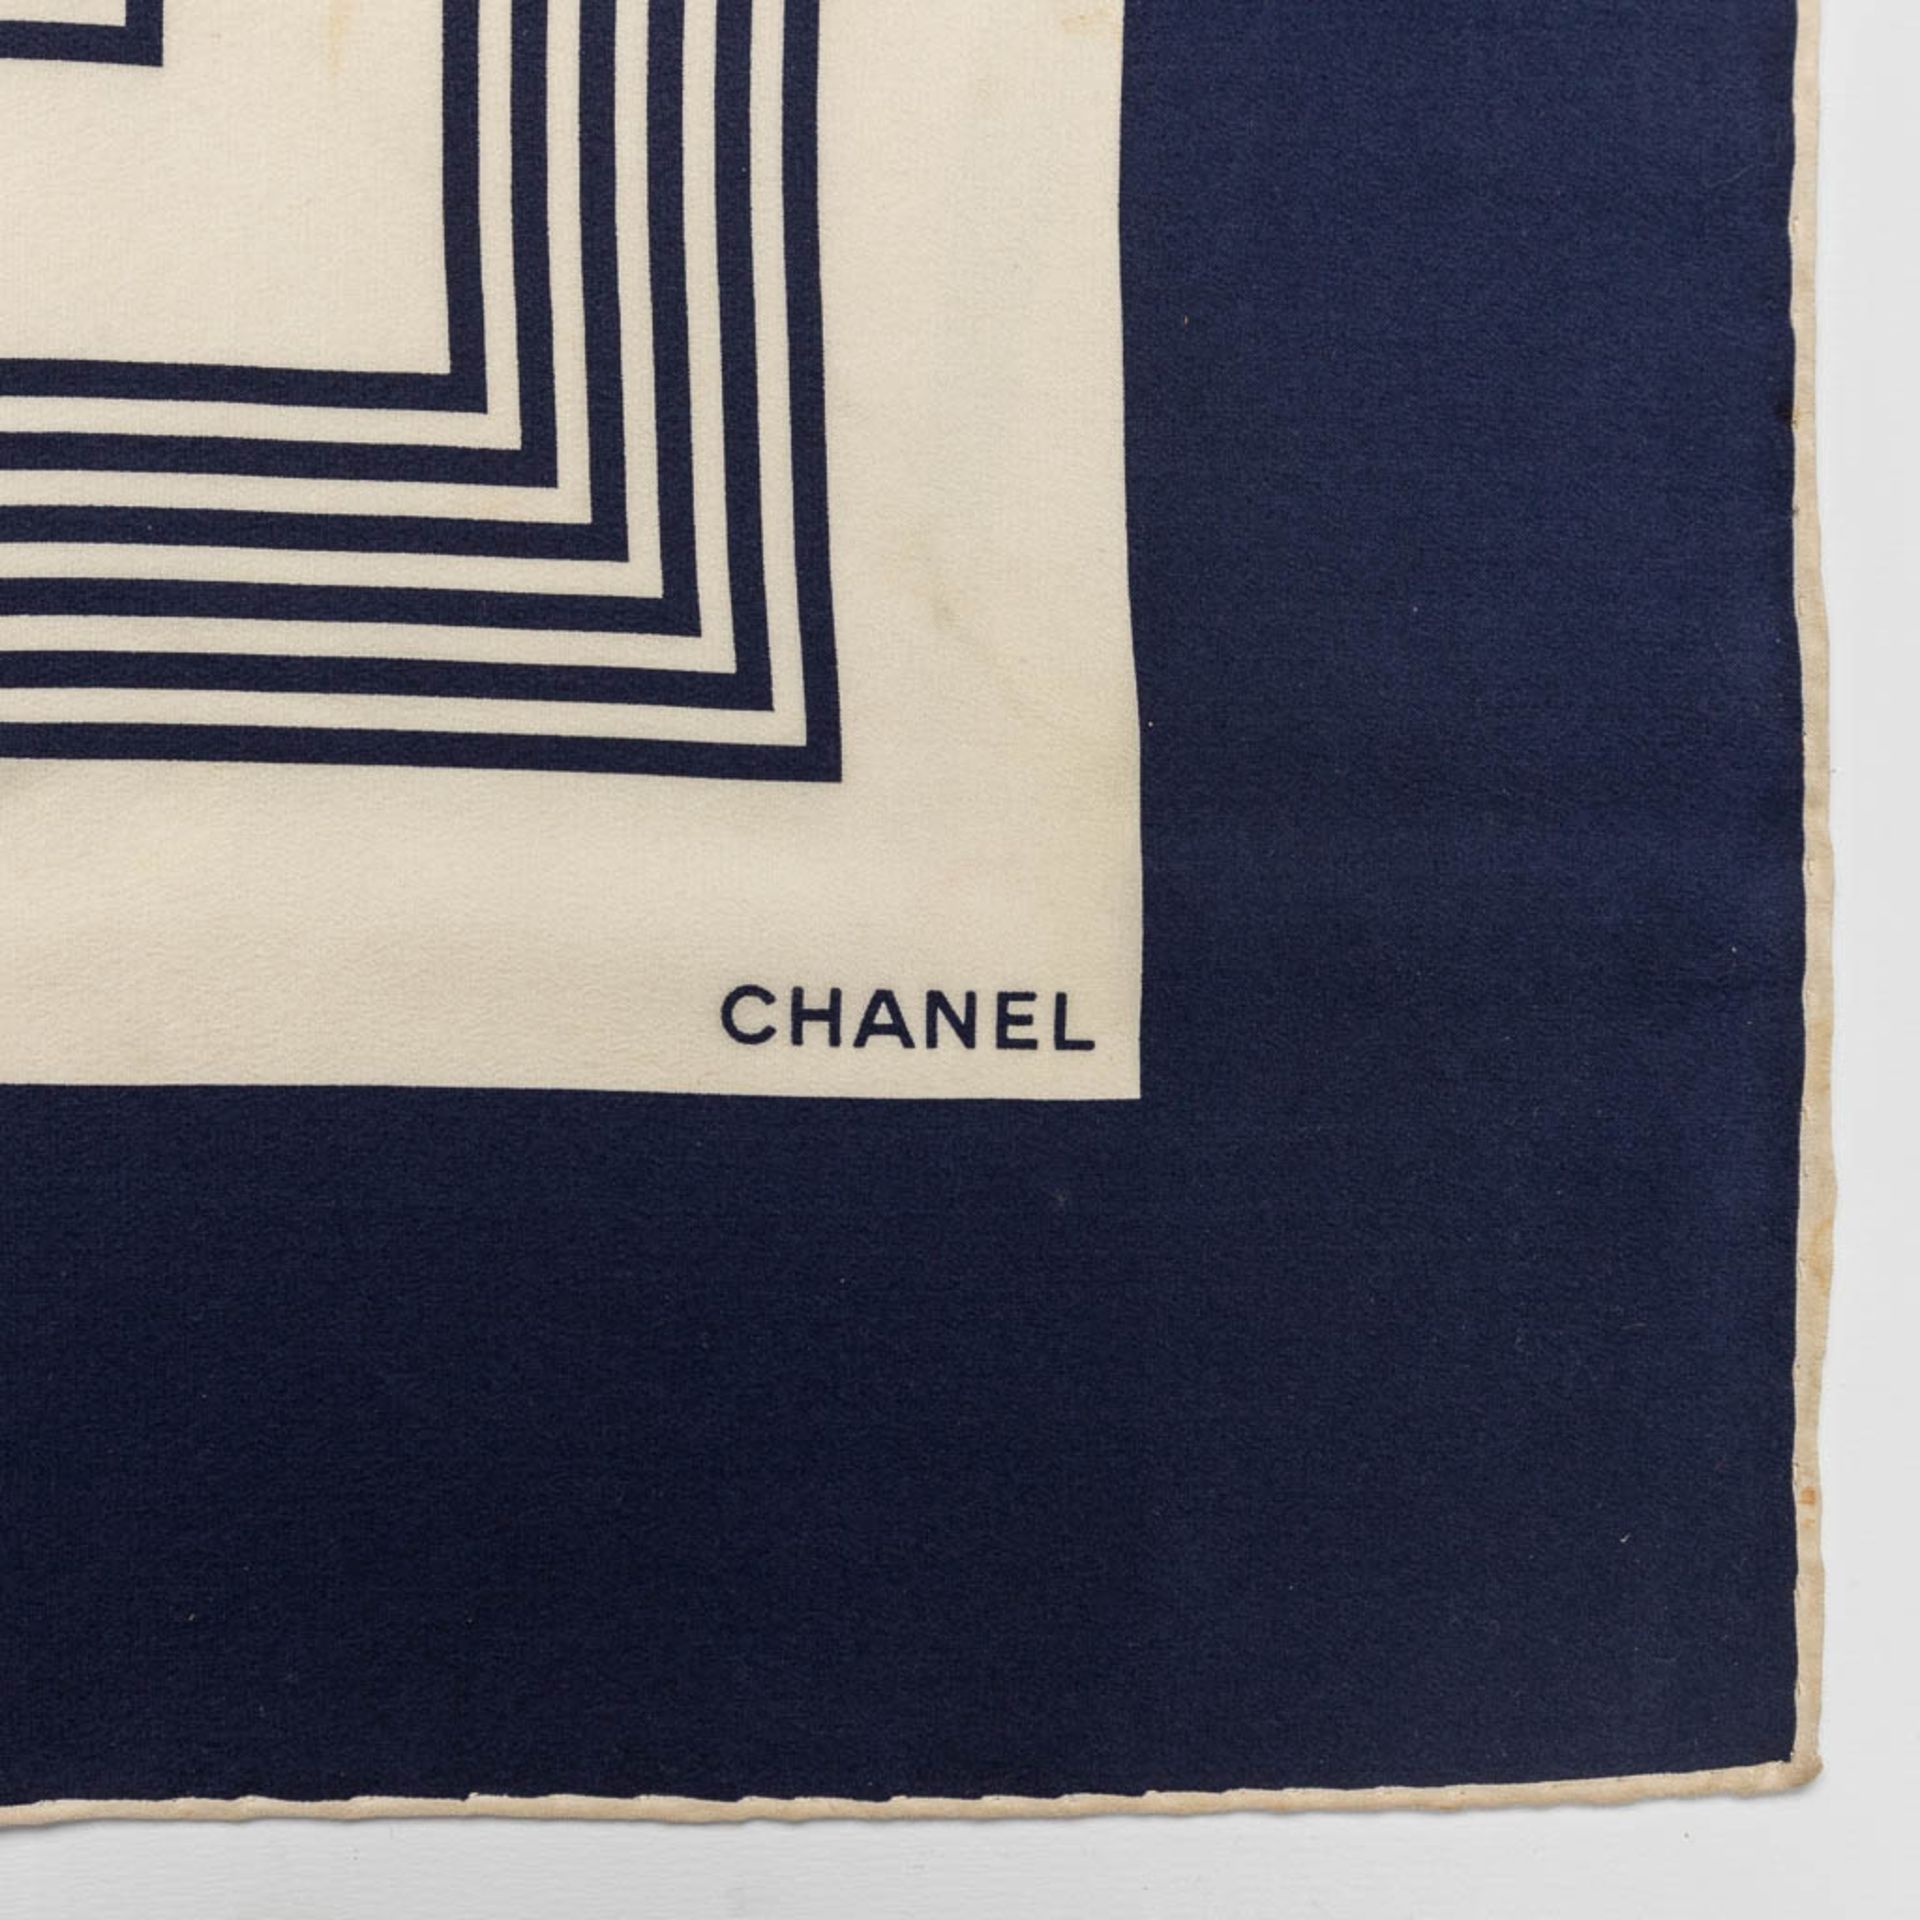 Chanel, a collection of 3 silk scarfs. (L: 86 x W: 86 cm) - Image 26 of 28